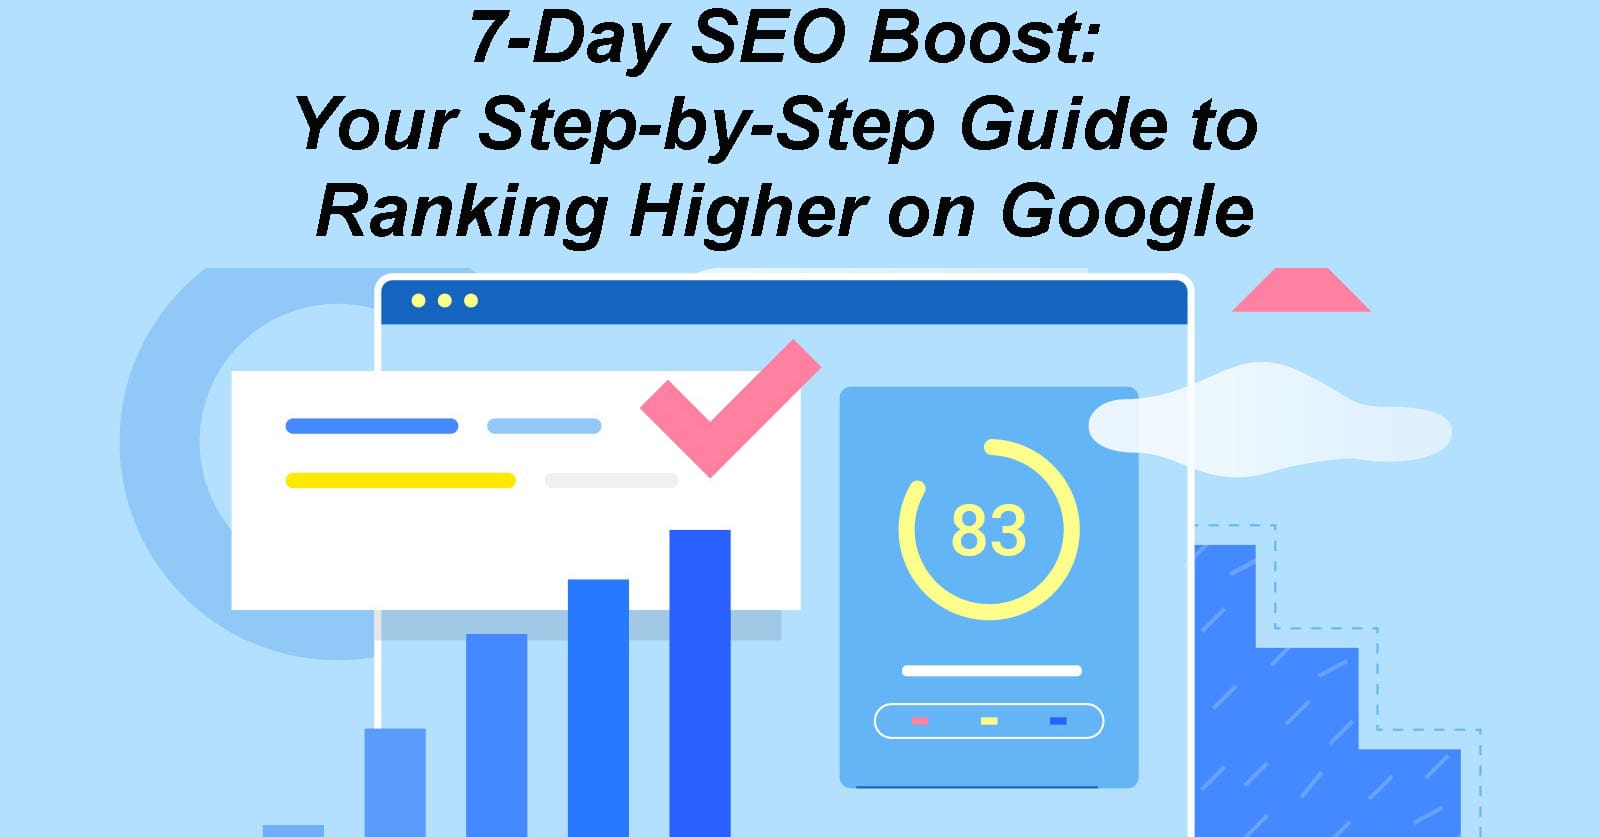 7-Day SEO Boost: Your Step-by-Step Guide to Ranking Higher on Google